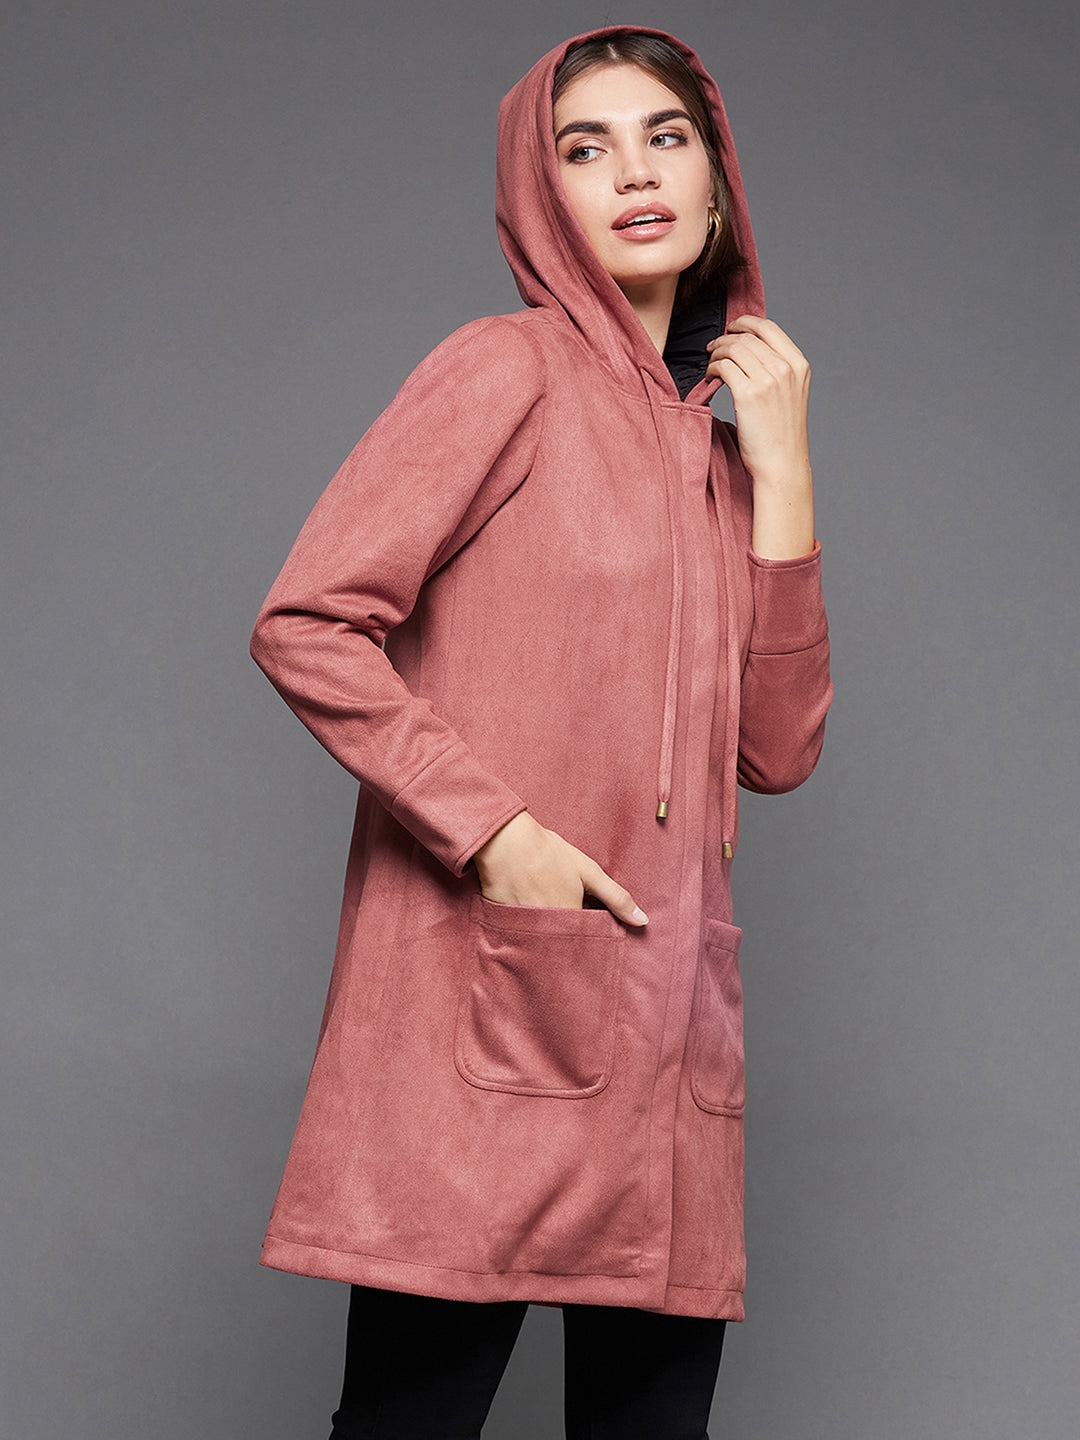 MISS CHASE | Dark Peach Solid Hooded Neck Full Sleeves Casual Winter Wear Polyester High Low Longline Jacket